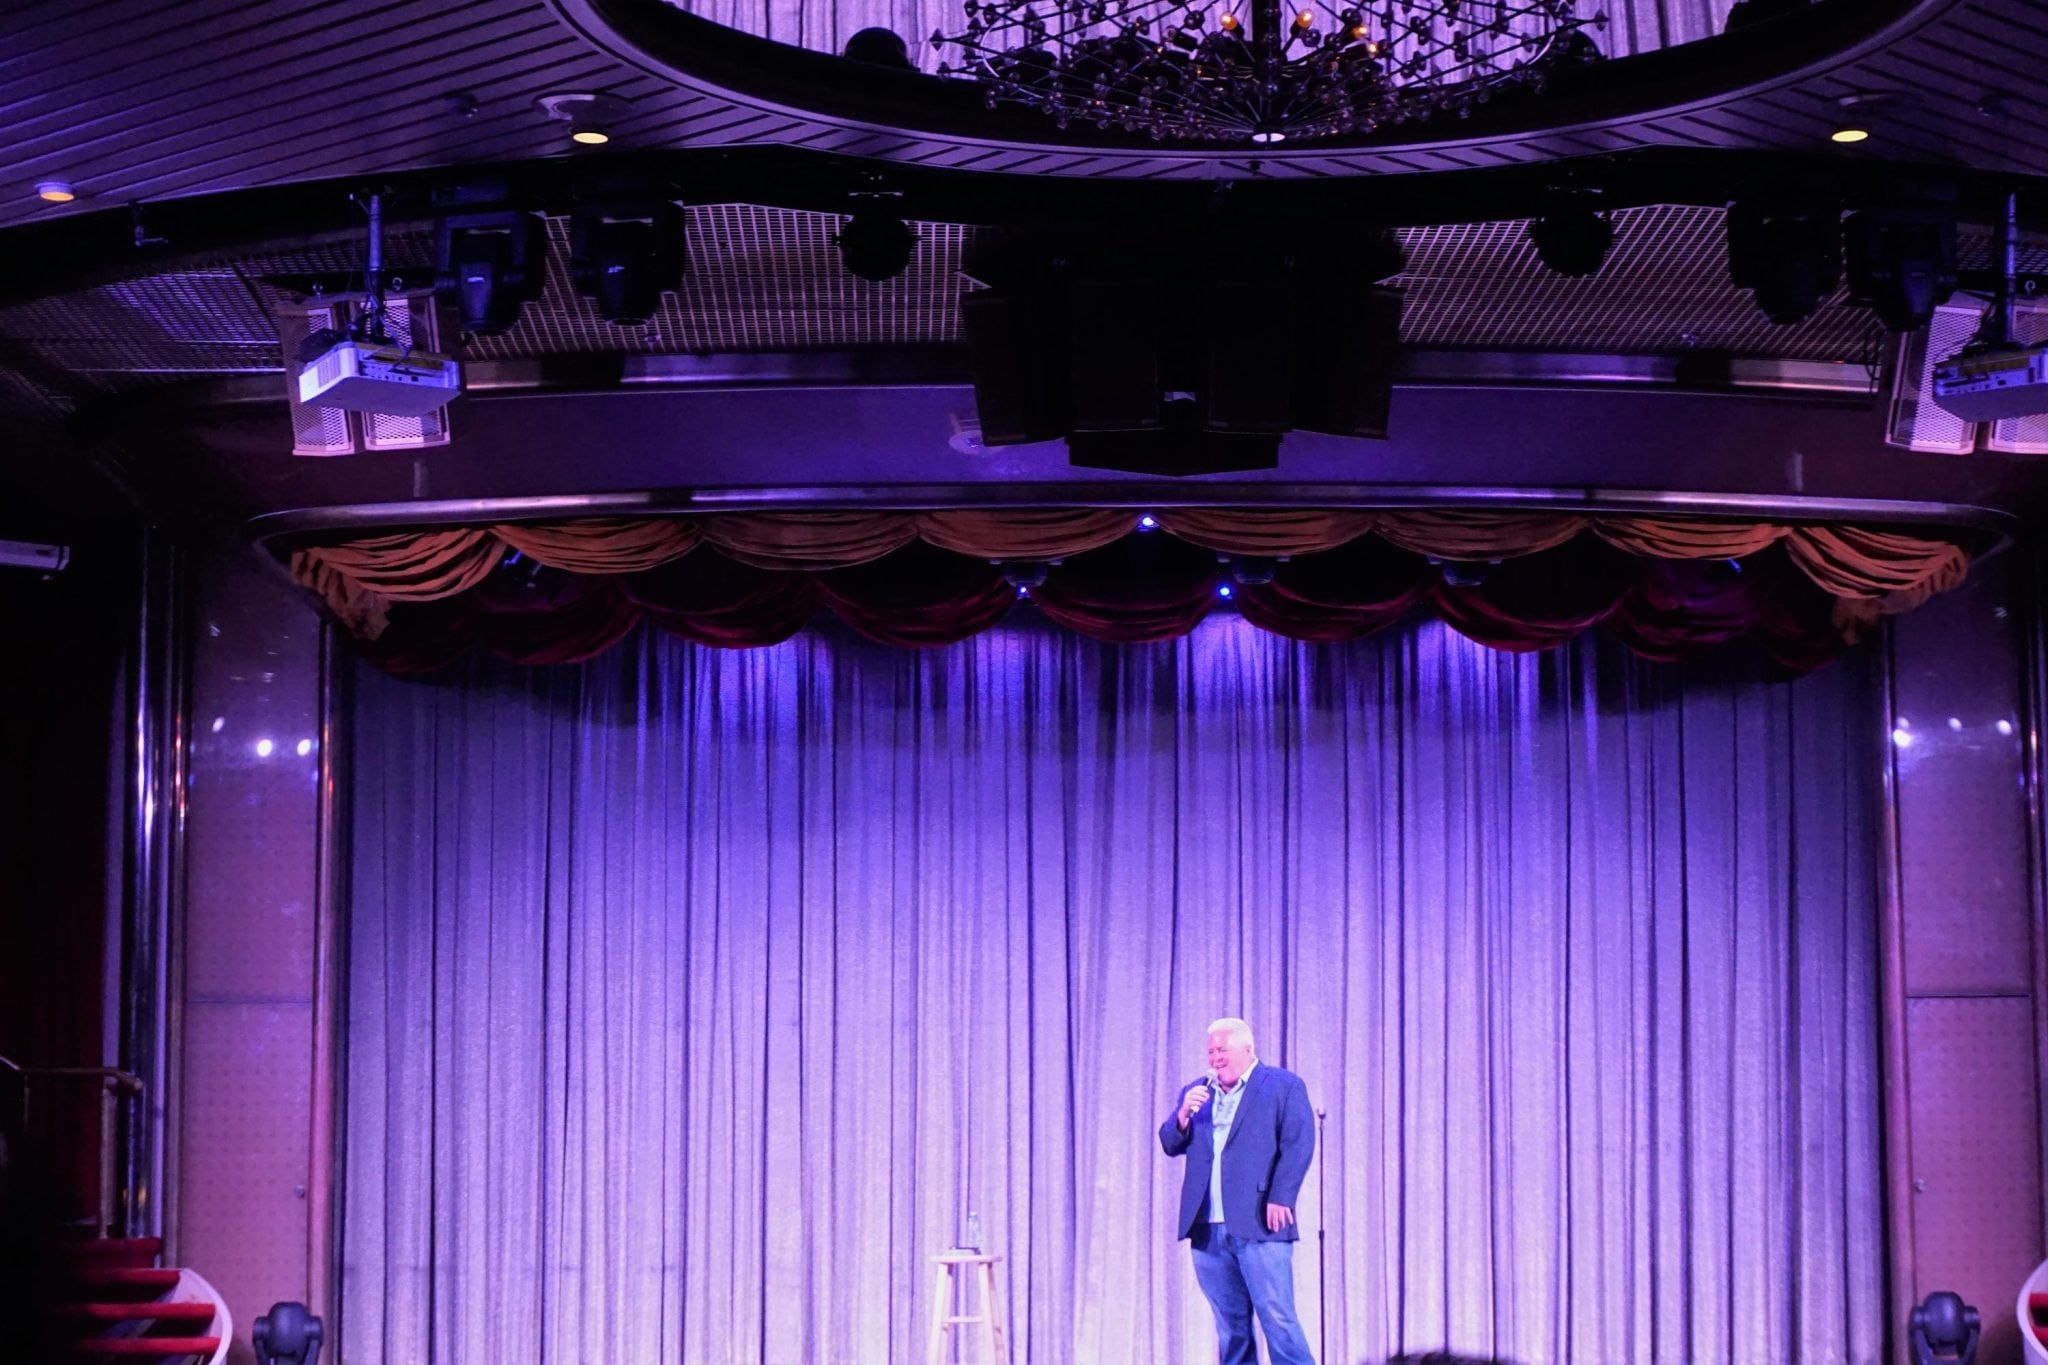 Comedian on Majesty of the Seas